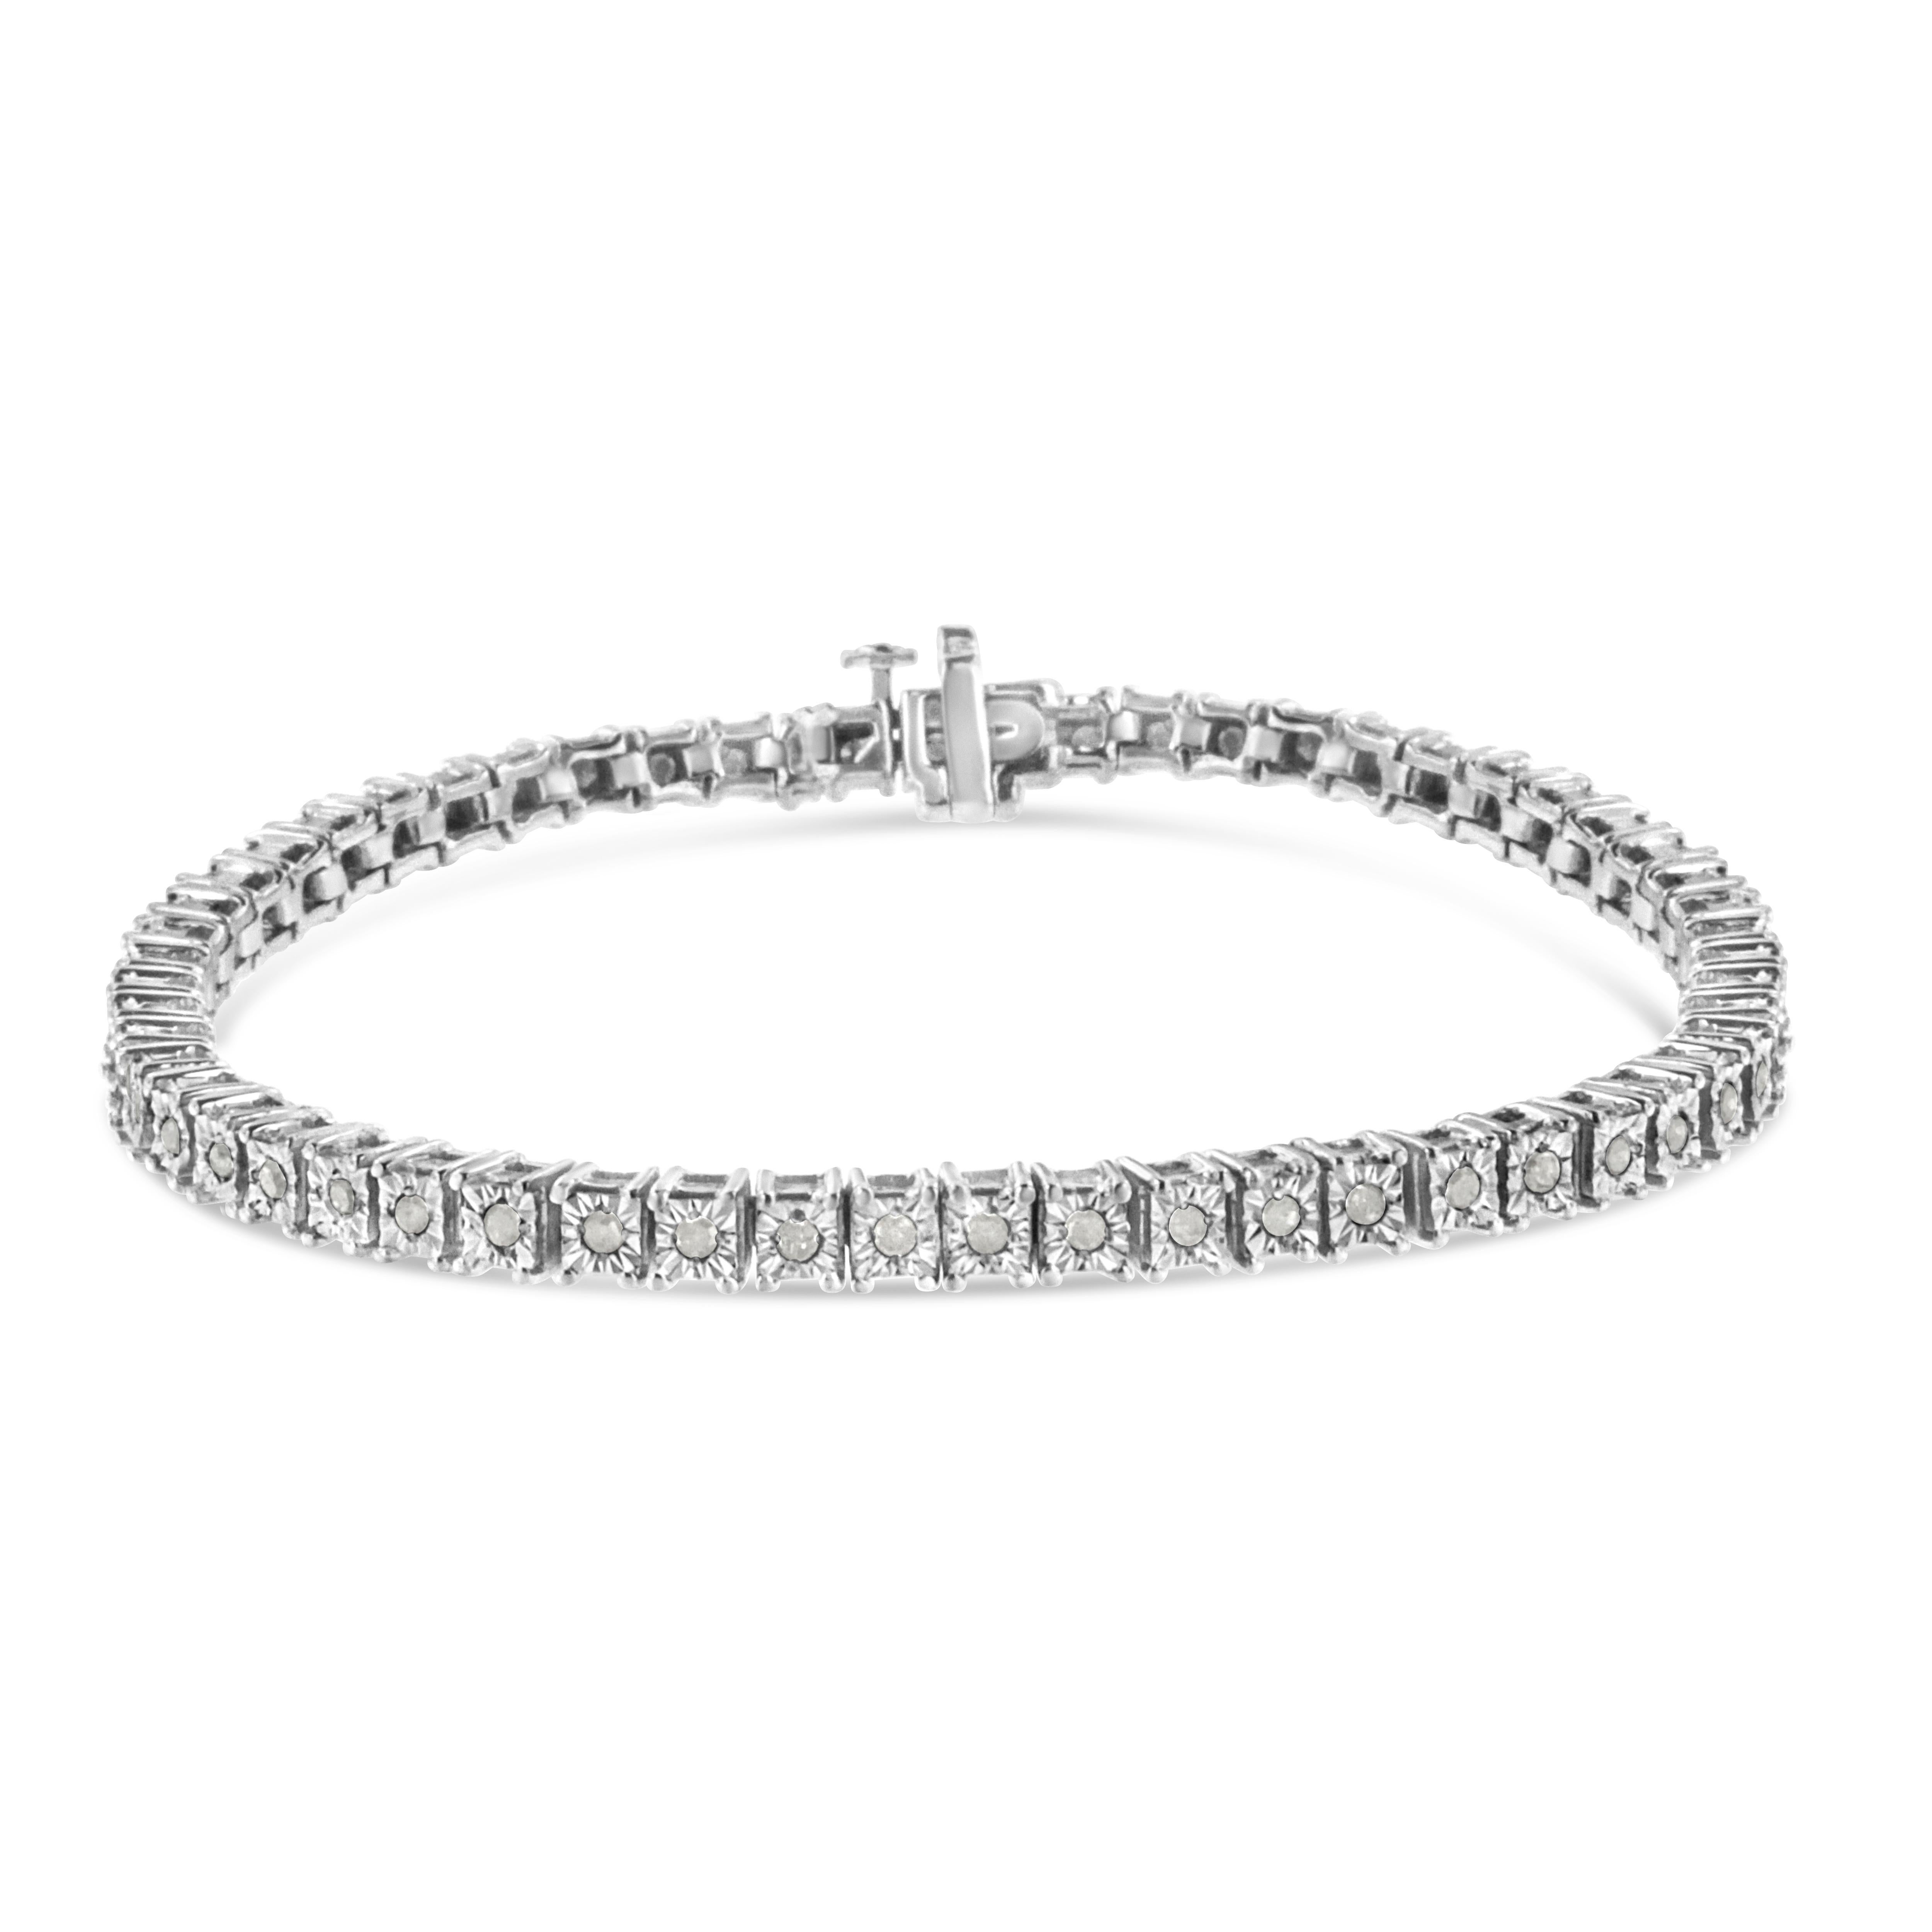 Feminine yet glamorous, this tennis bracelet shines in a polished .925 sterling silver setting. Each link of this tennis diamond bracelet holds a beautiful rose-cut diamond to create a seamless look with 56 stones in total. Give her this bracelet